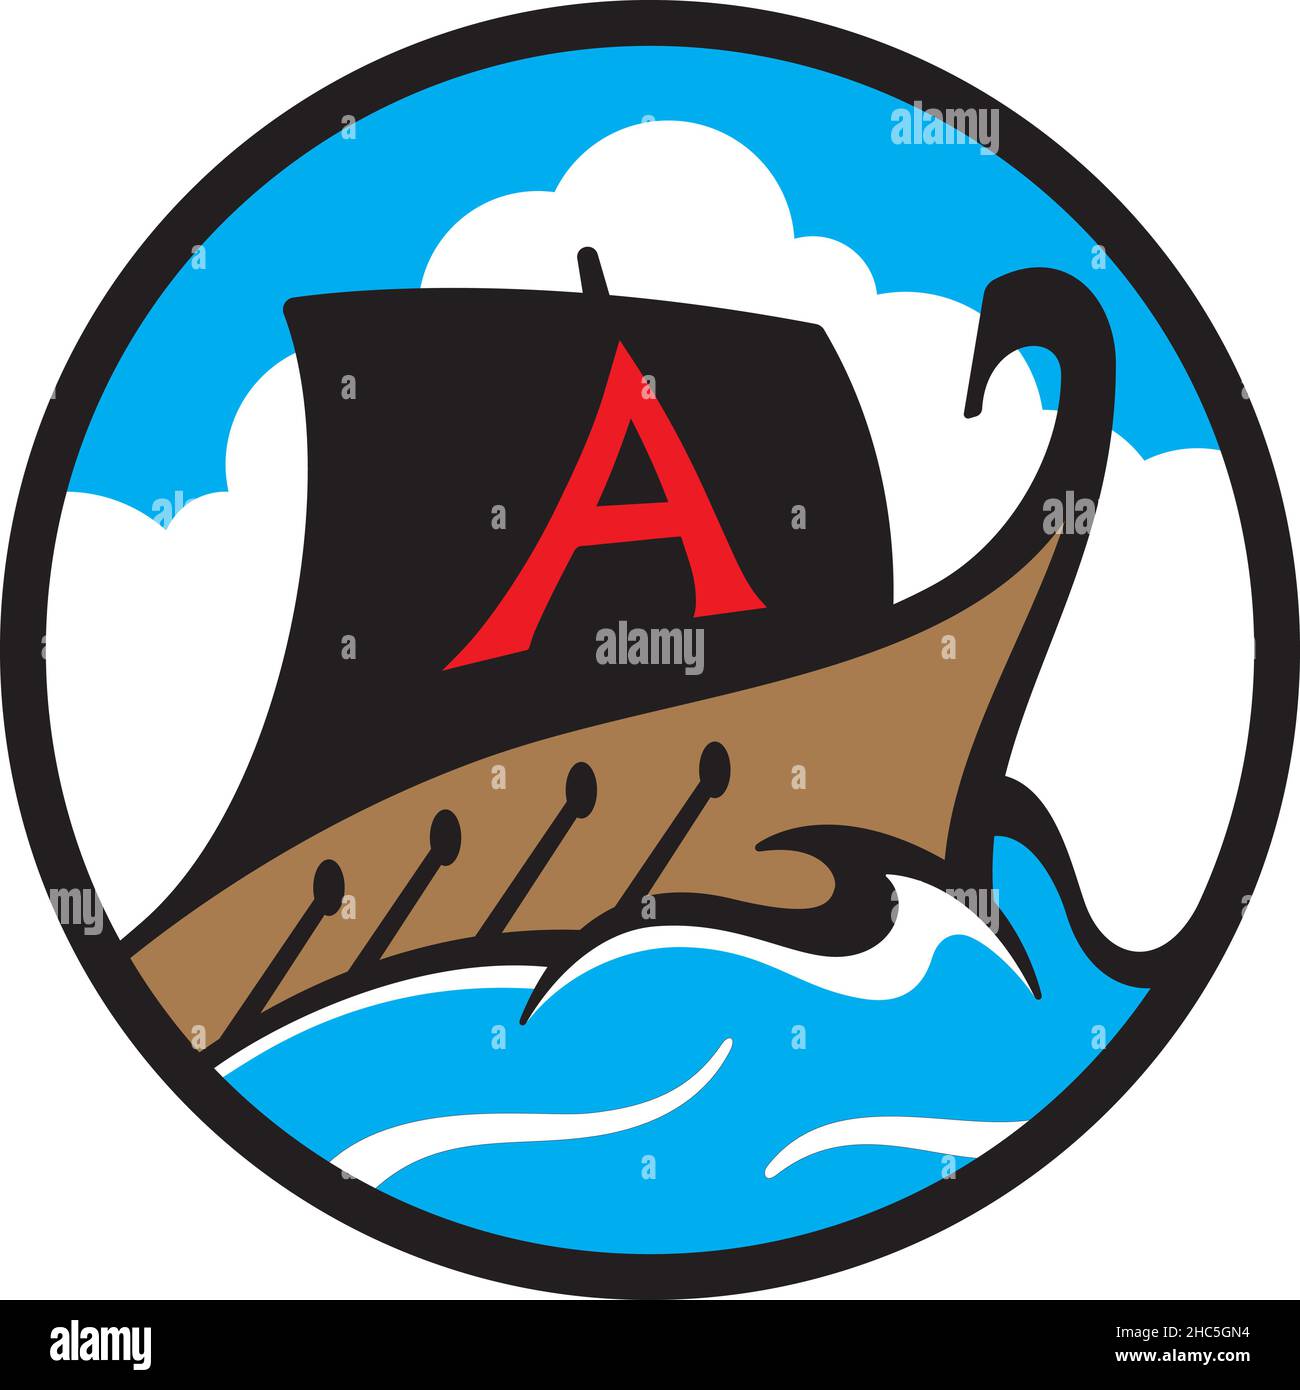 Historic ship vector logo or icon design with oars and sail. Vector illustration of ancient Greek galley or Viking ship sailing through ocean waves. Stock Vector